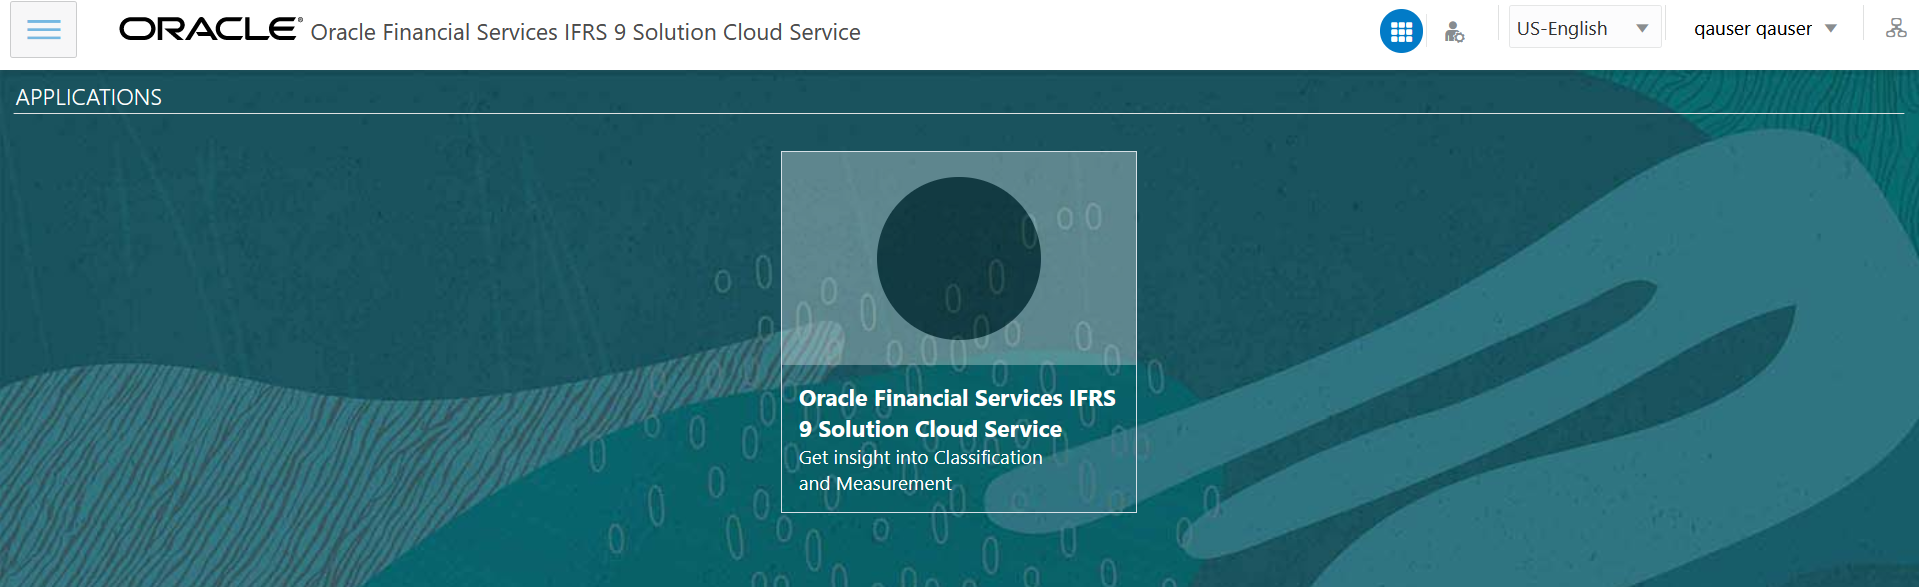 Oracle Financial Services IFRS 9 Solution Cloud Service